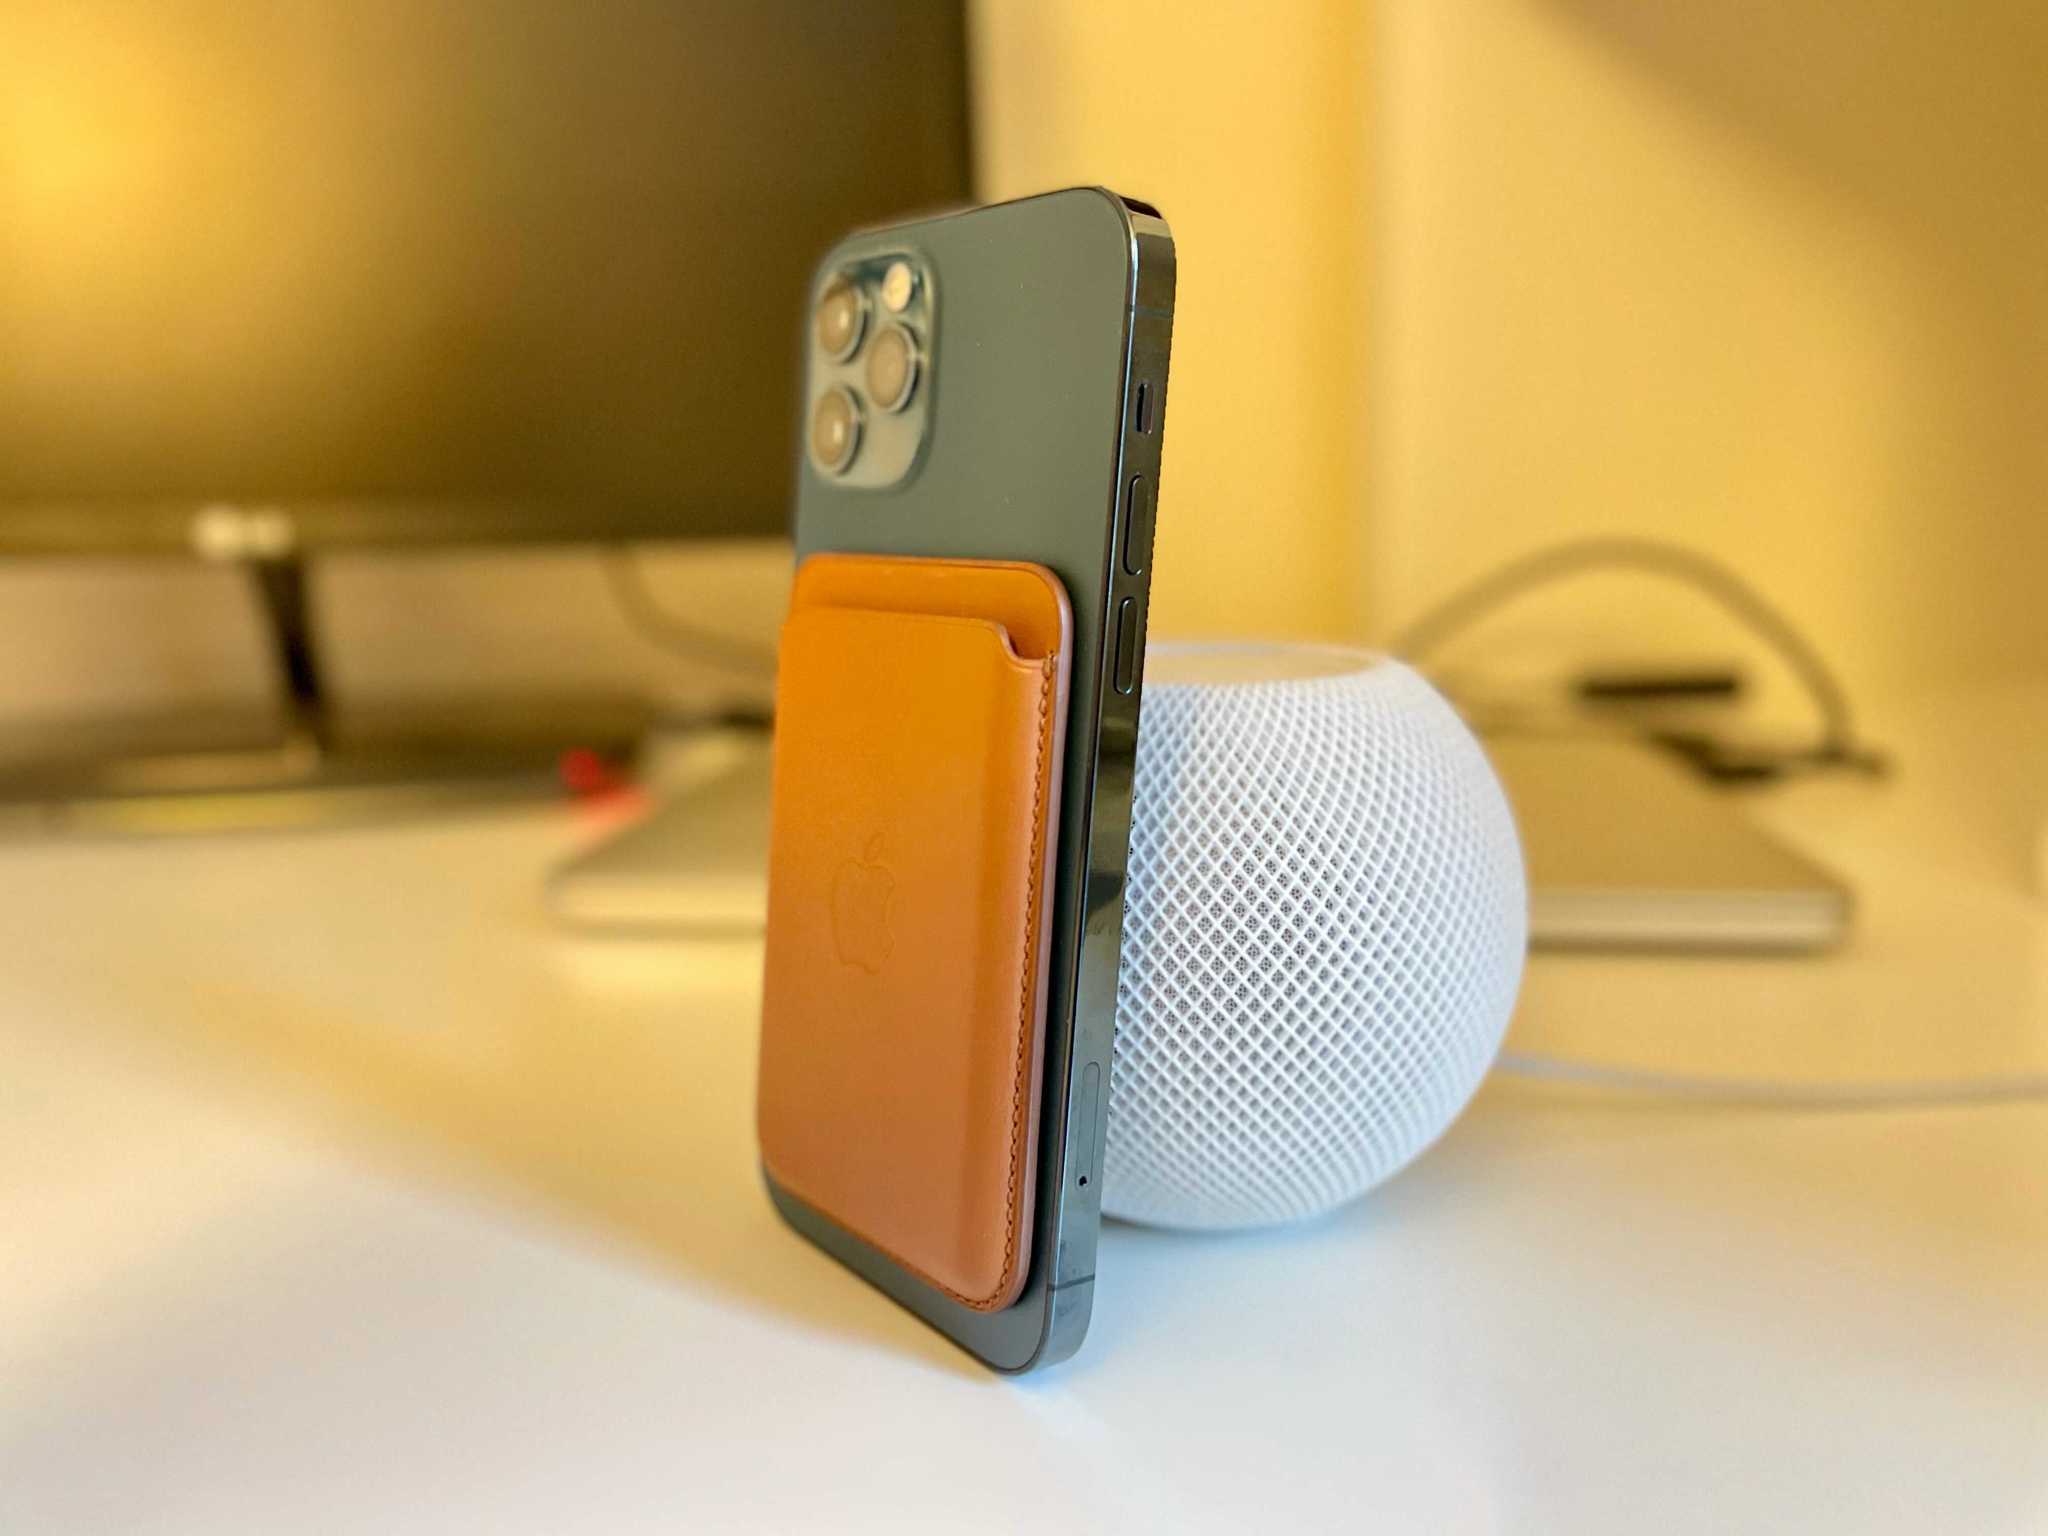 Magsafe Silicone Case & Magsafe Wallet - 1 Month Review